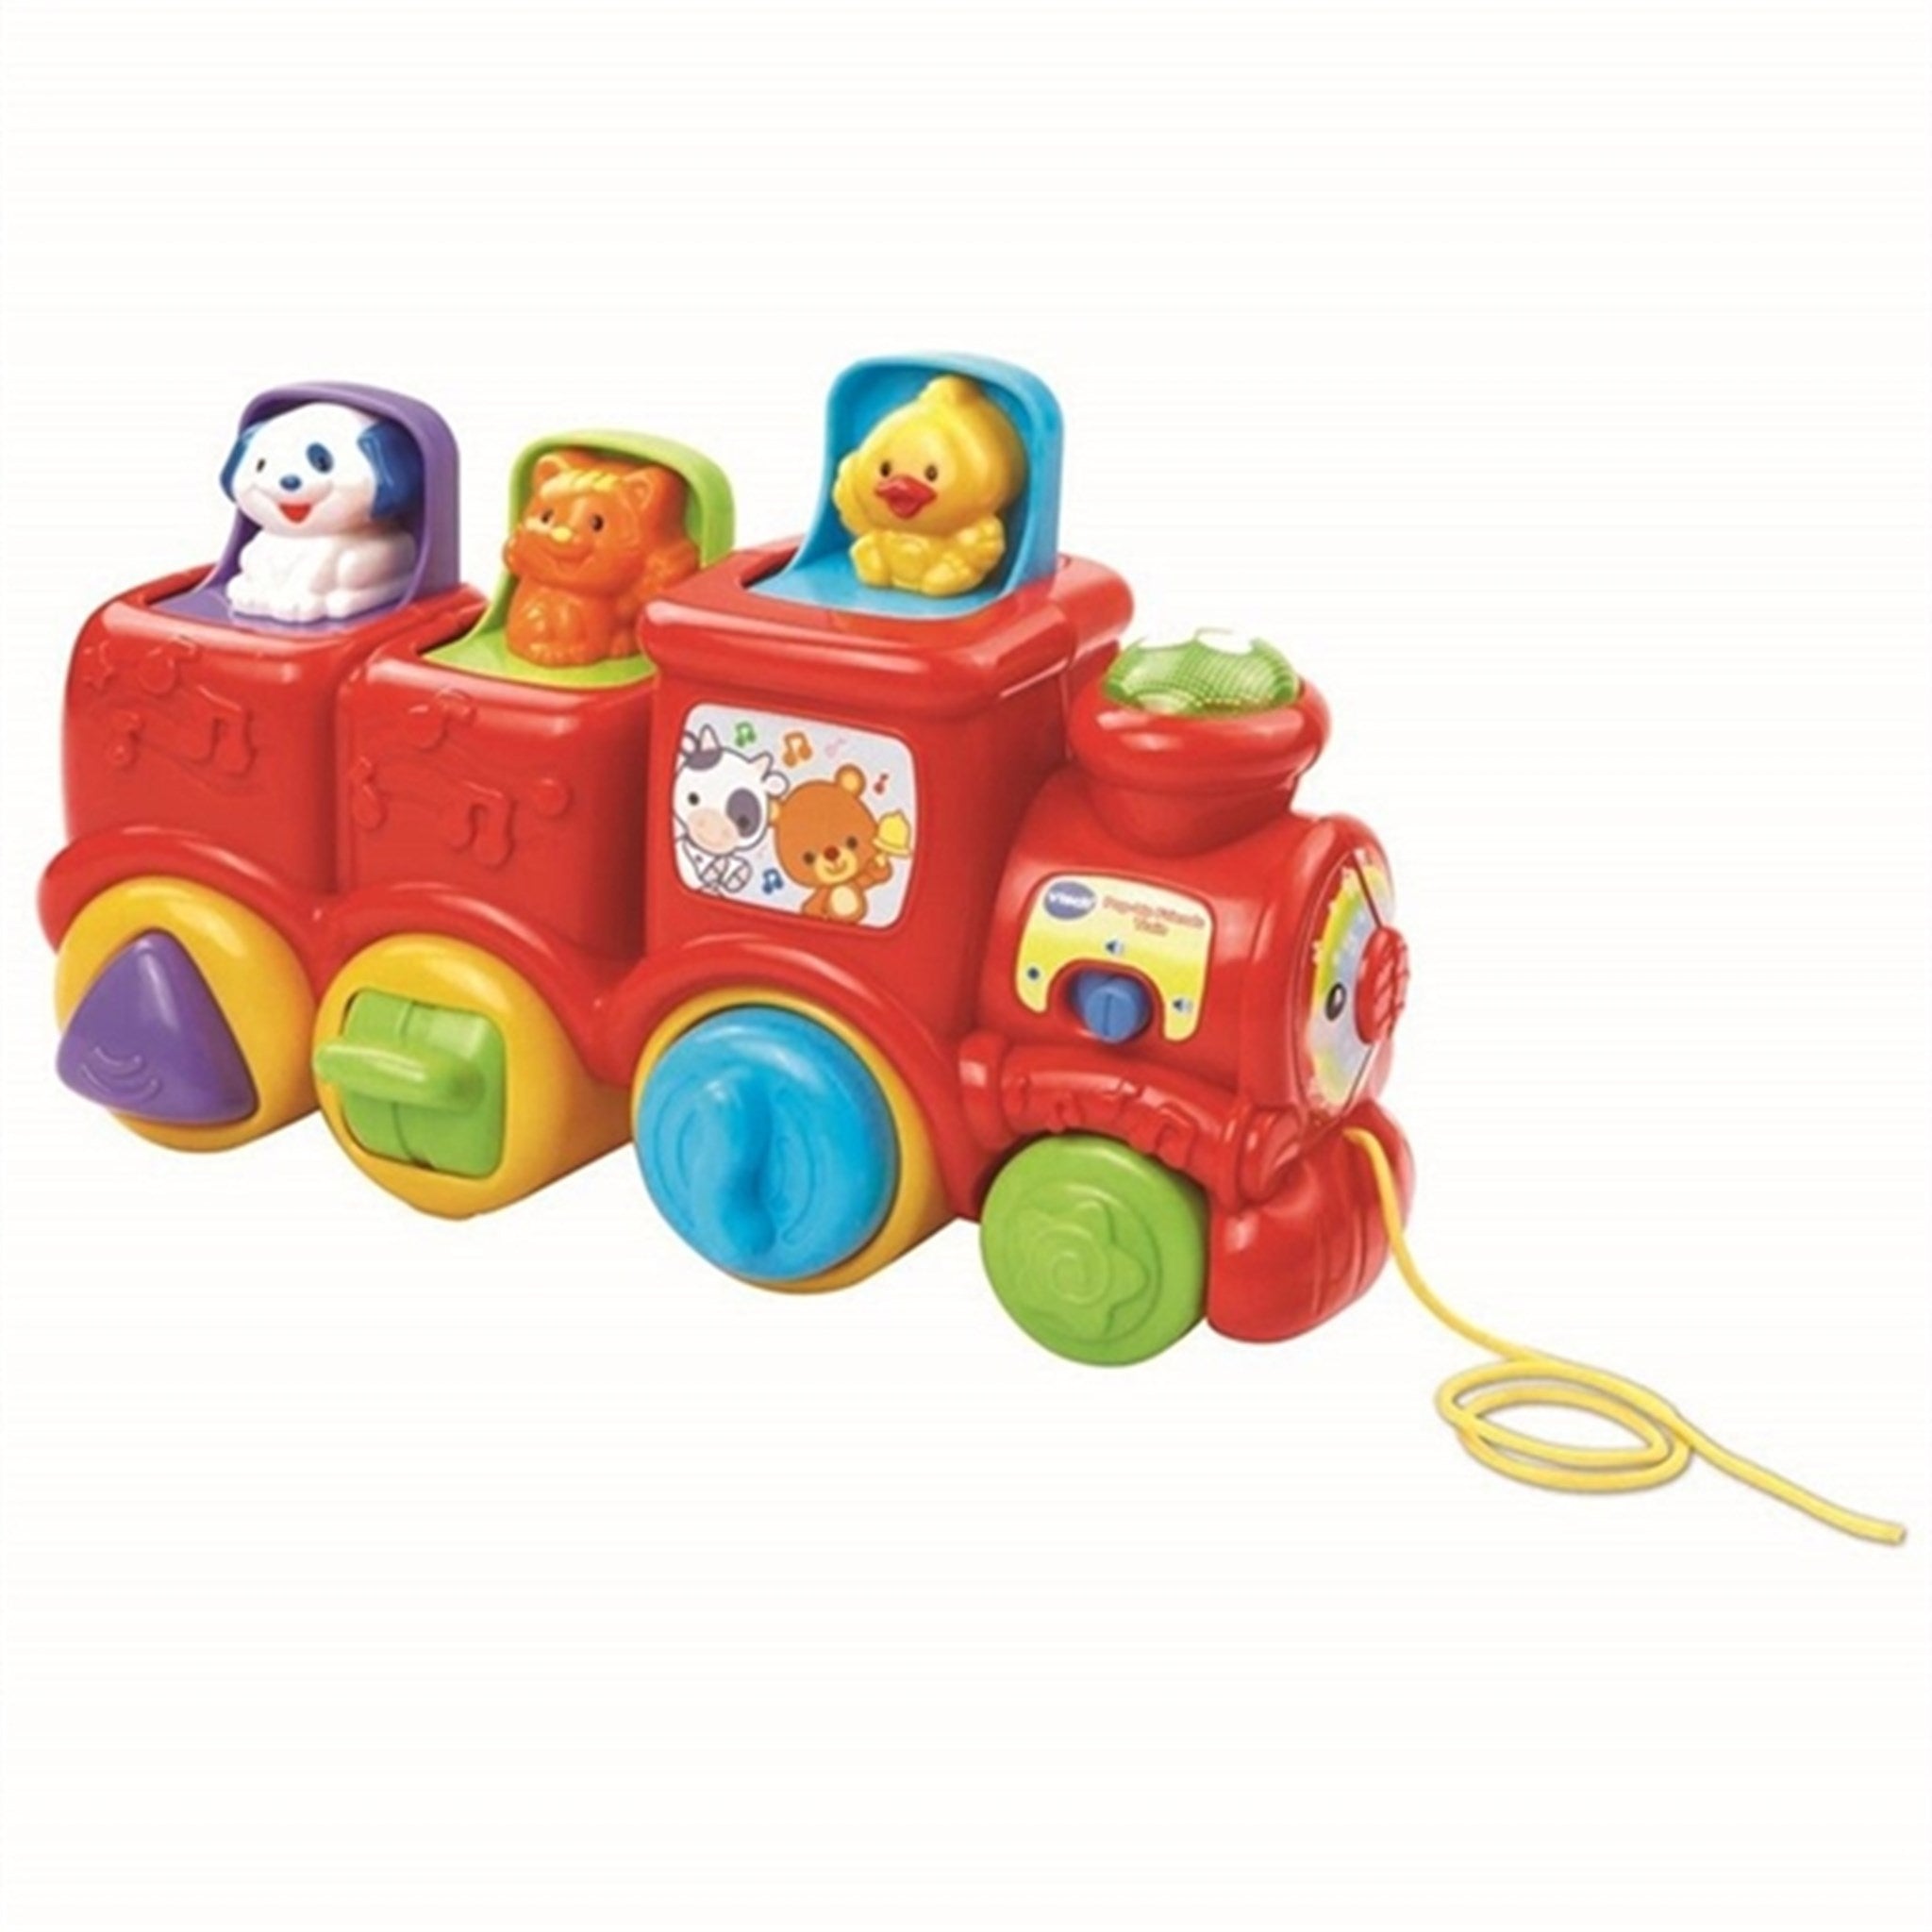 Vtech Baby Train with Pop-up Friends